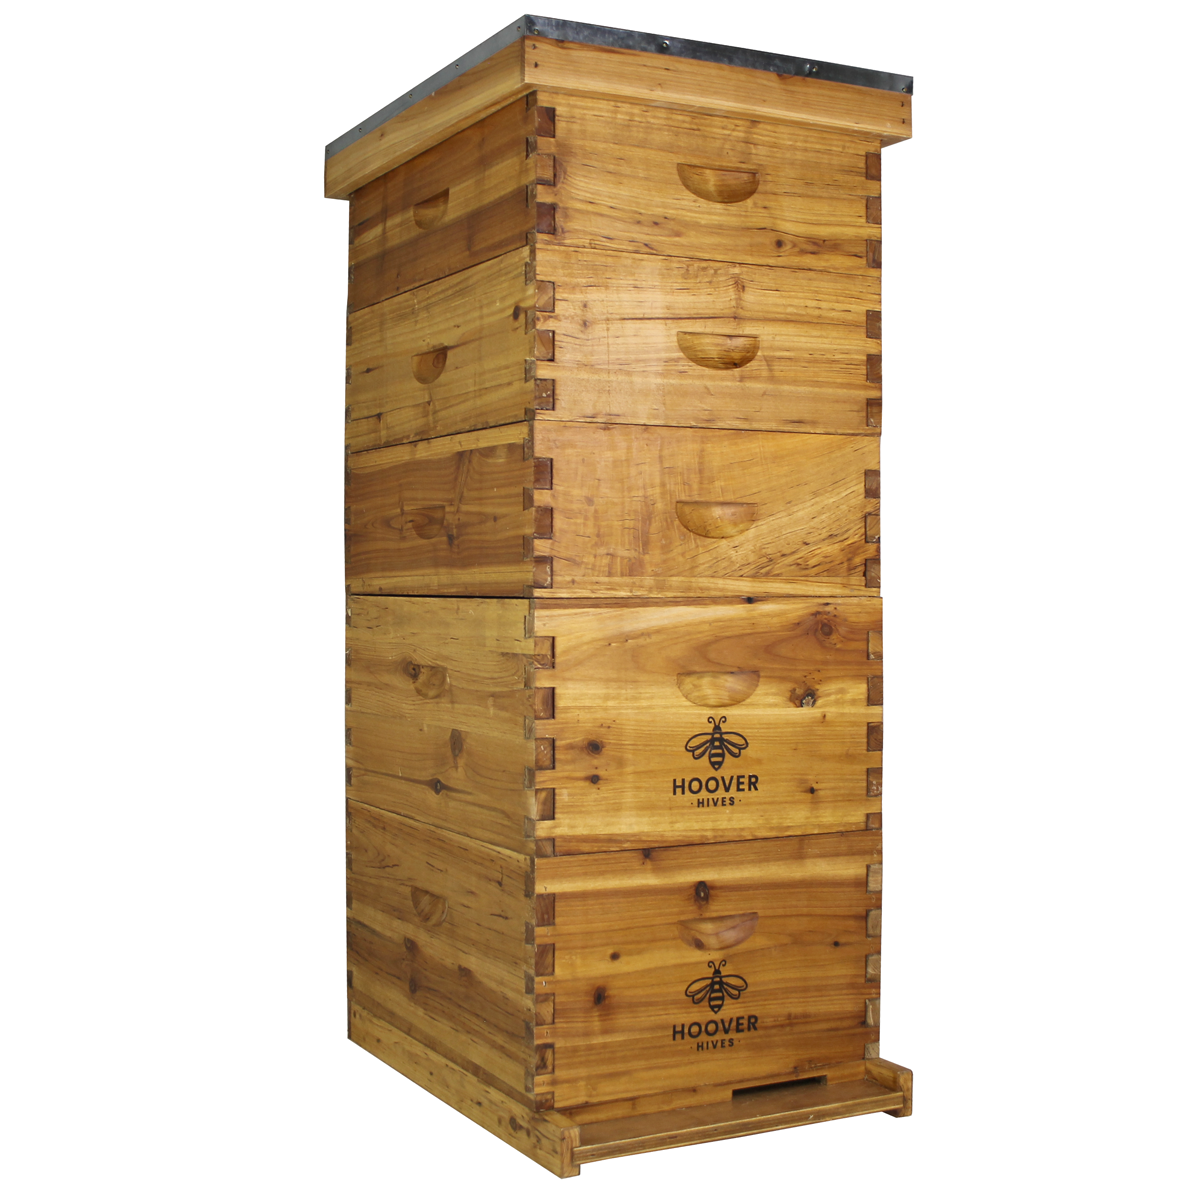 Hoover Hives Wax Coated 10 Frame Beehive With 2 Deep Bee Boxes & 3 Medium Bee Boxes